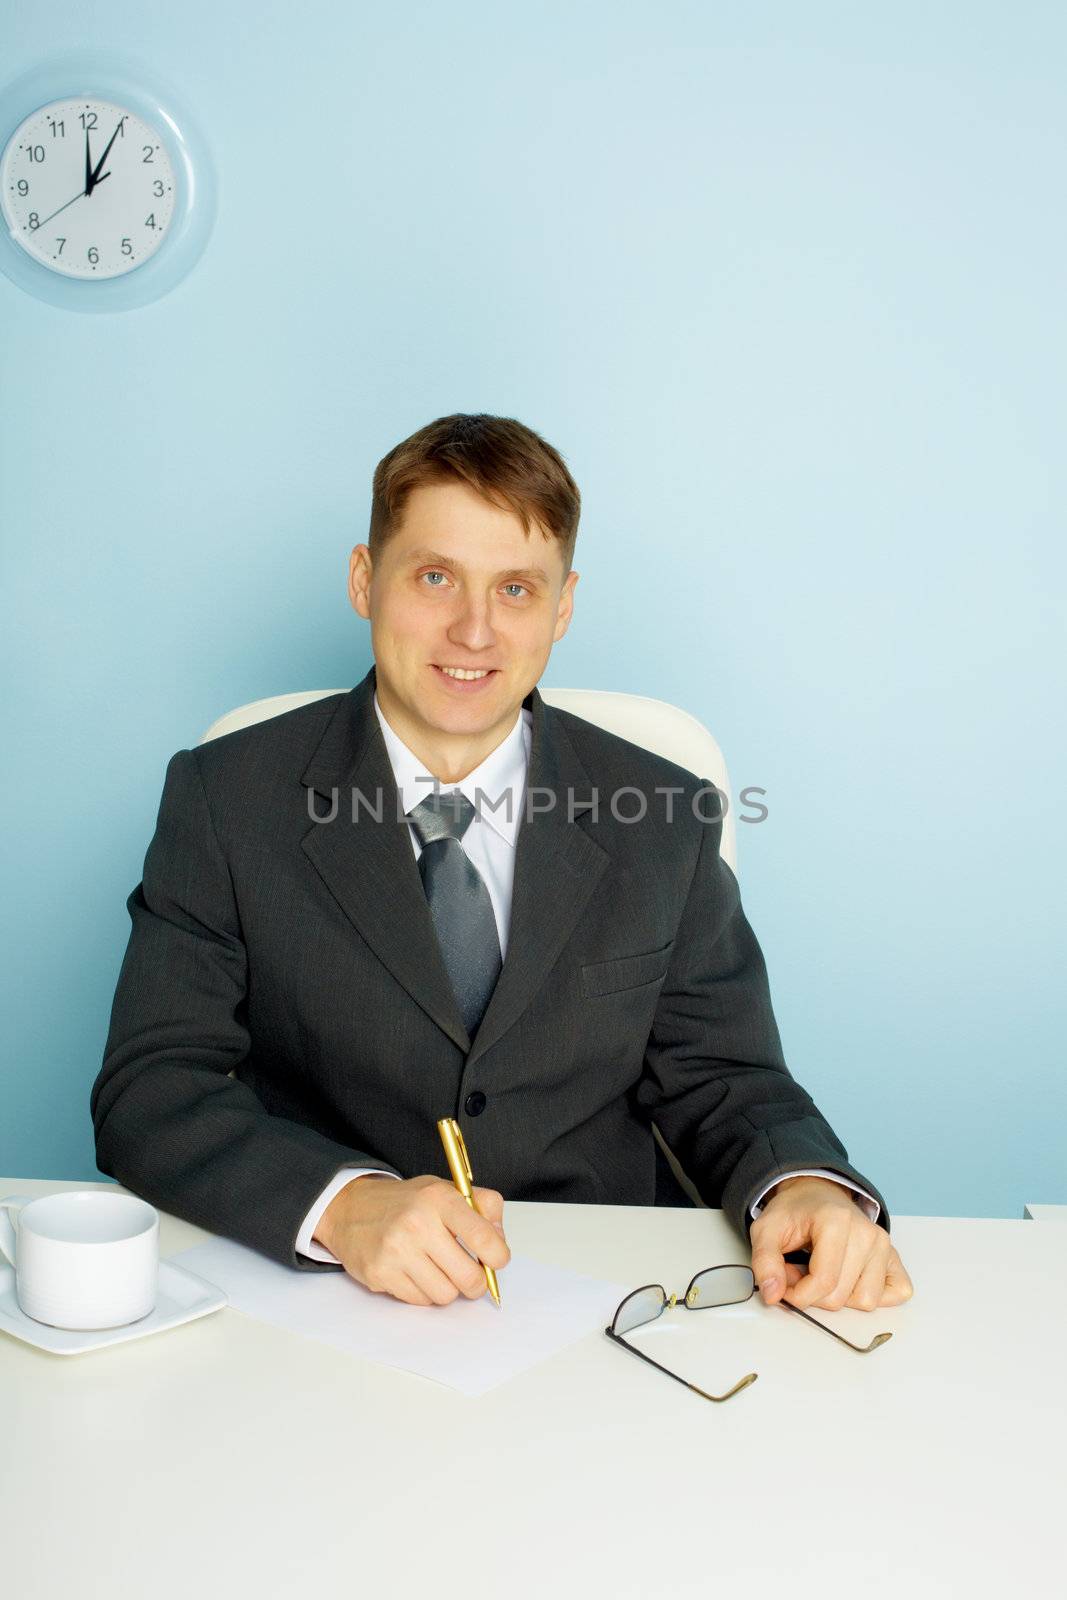 Smiling business man takes notes. Office scene
